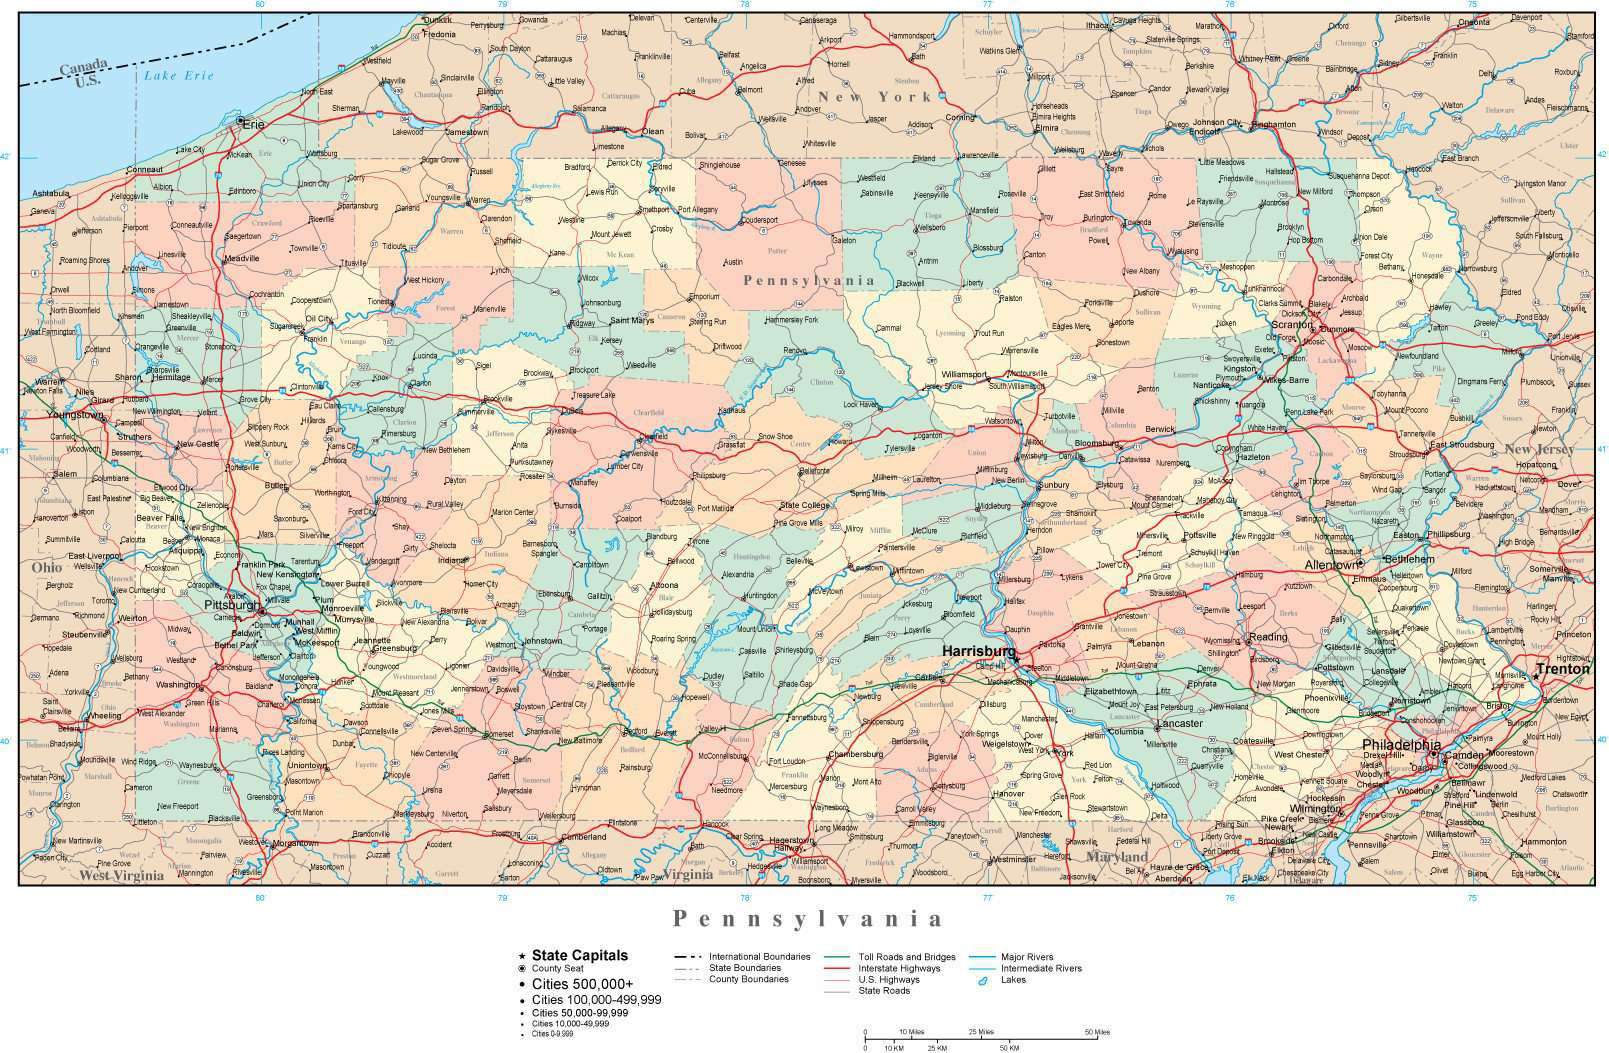 Pennsylvania Adobe Illustrator Map with Counties, Cities, County Seats